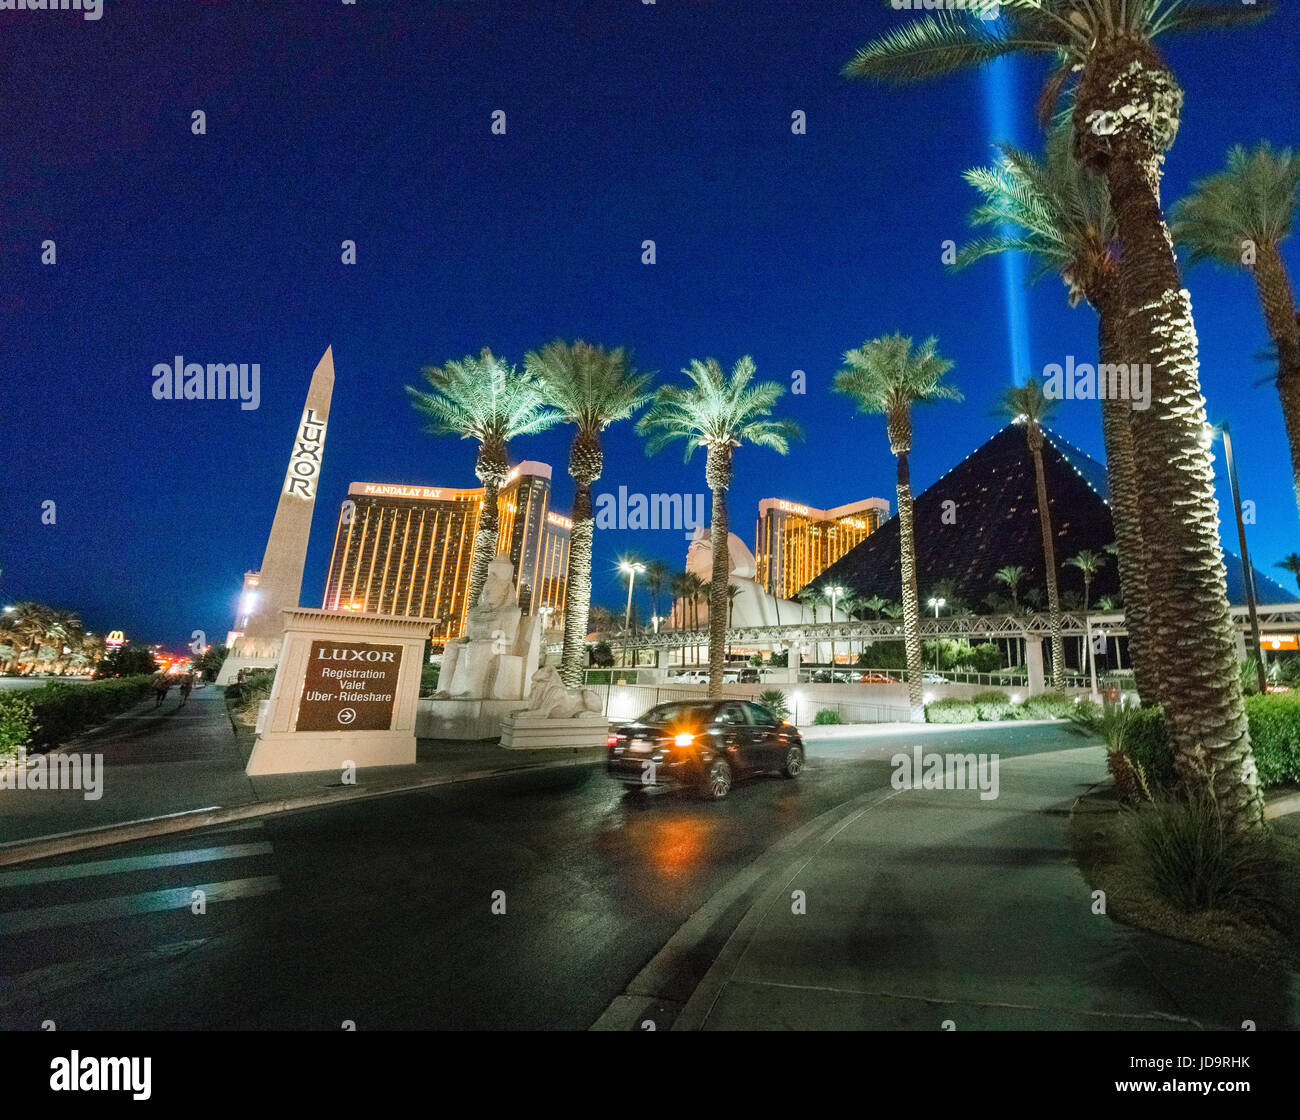 Luxor attraction with obelisk and palm trees, Las Vegas, Nevada, USA. Stock Photo